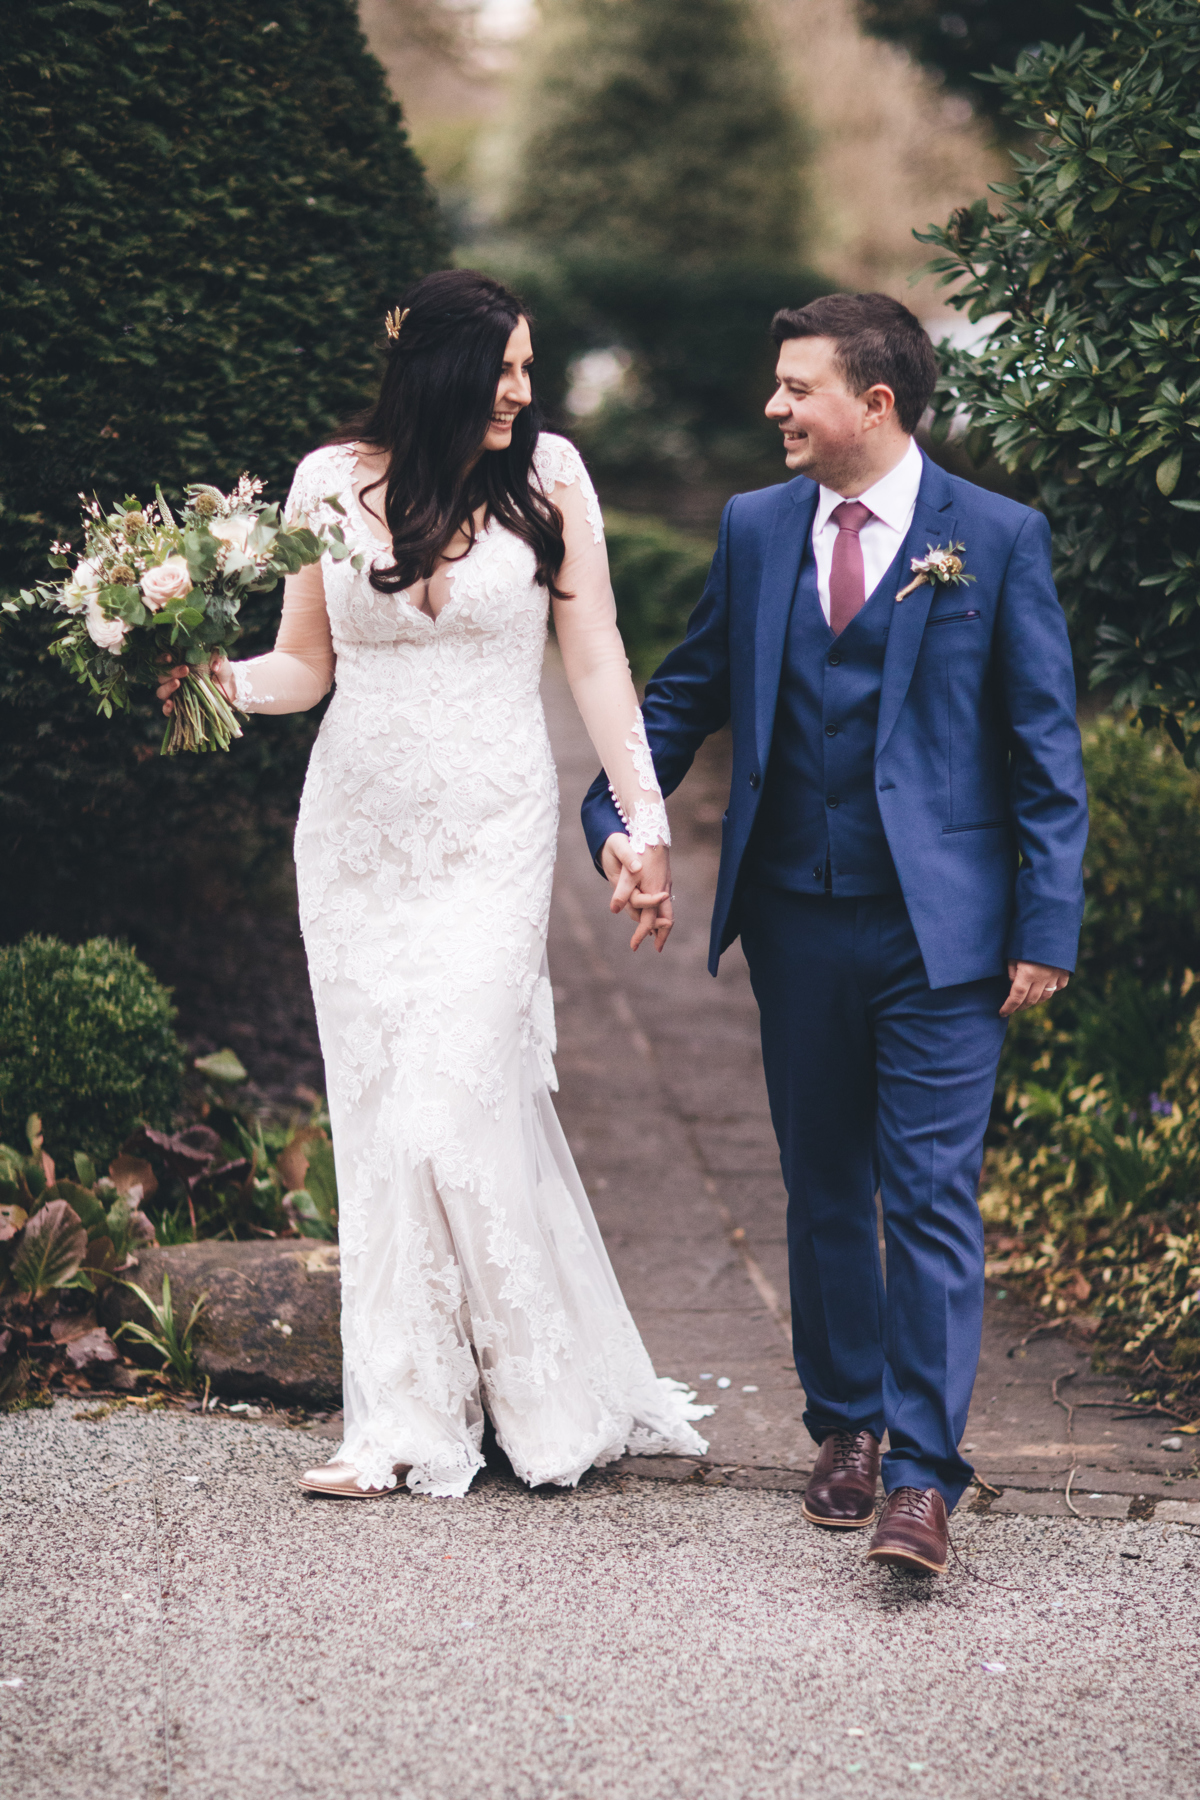 Bride and groom holding hands walking down a garden path with greenery on either side of them